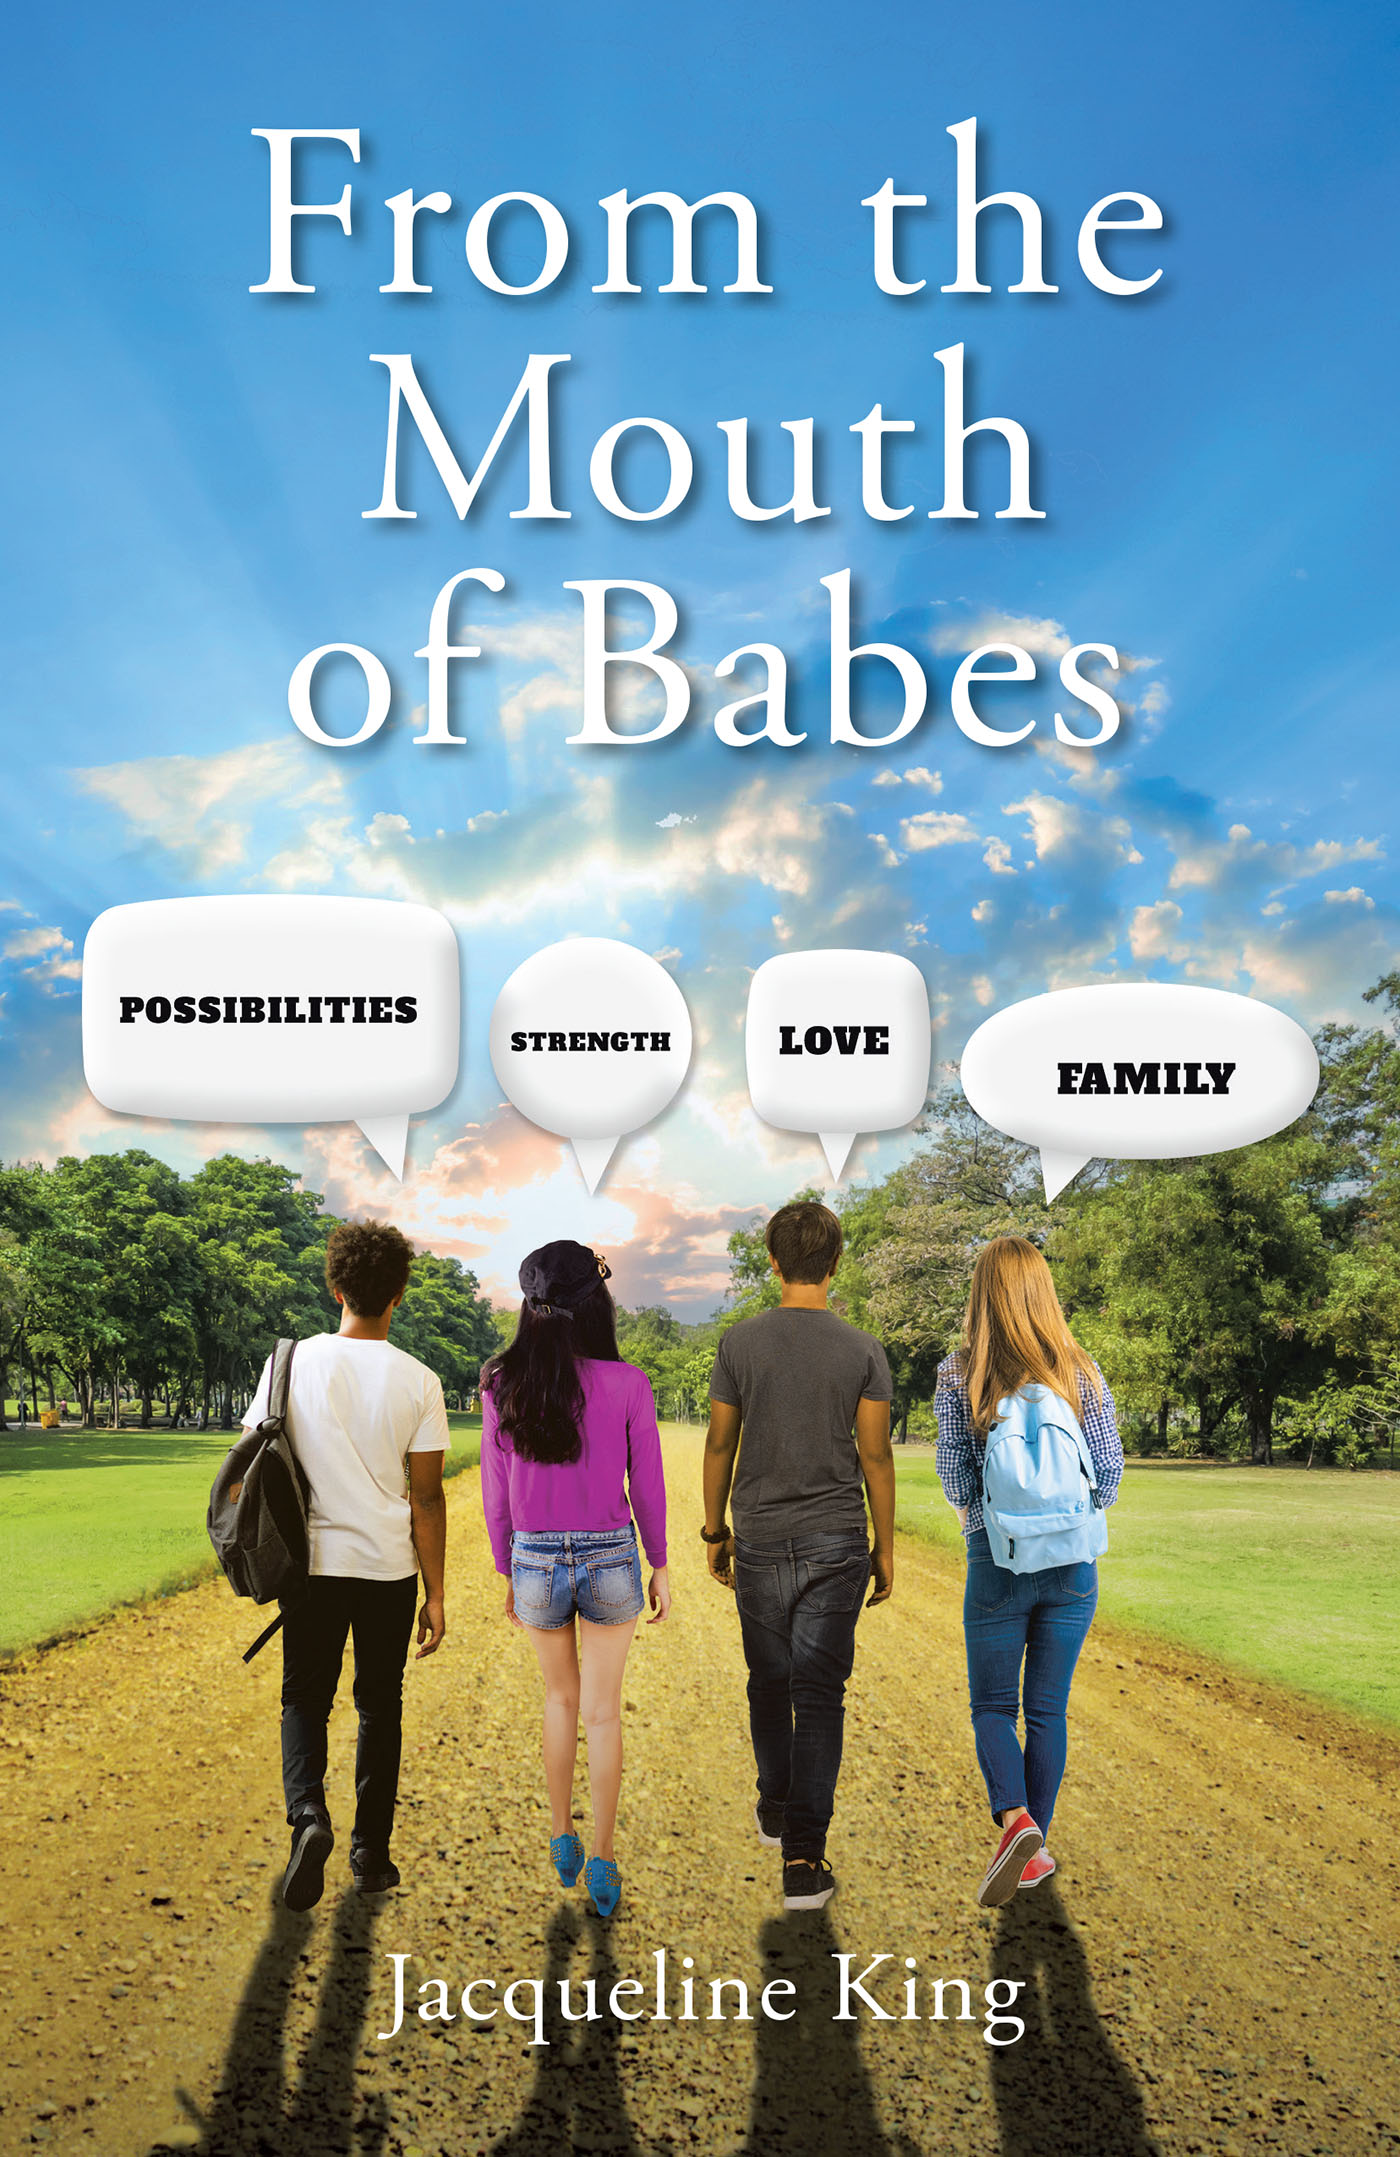 Jacqueline King’s Newly Released “From the Mouth of Babes” is a Moving Collection of Personal Testimonies and Reflections